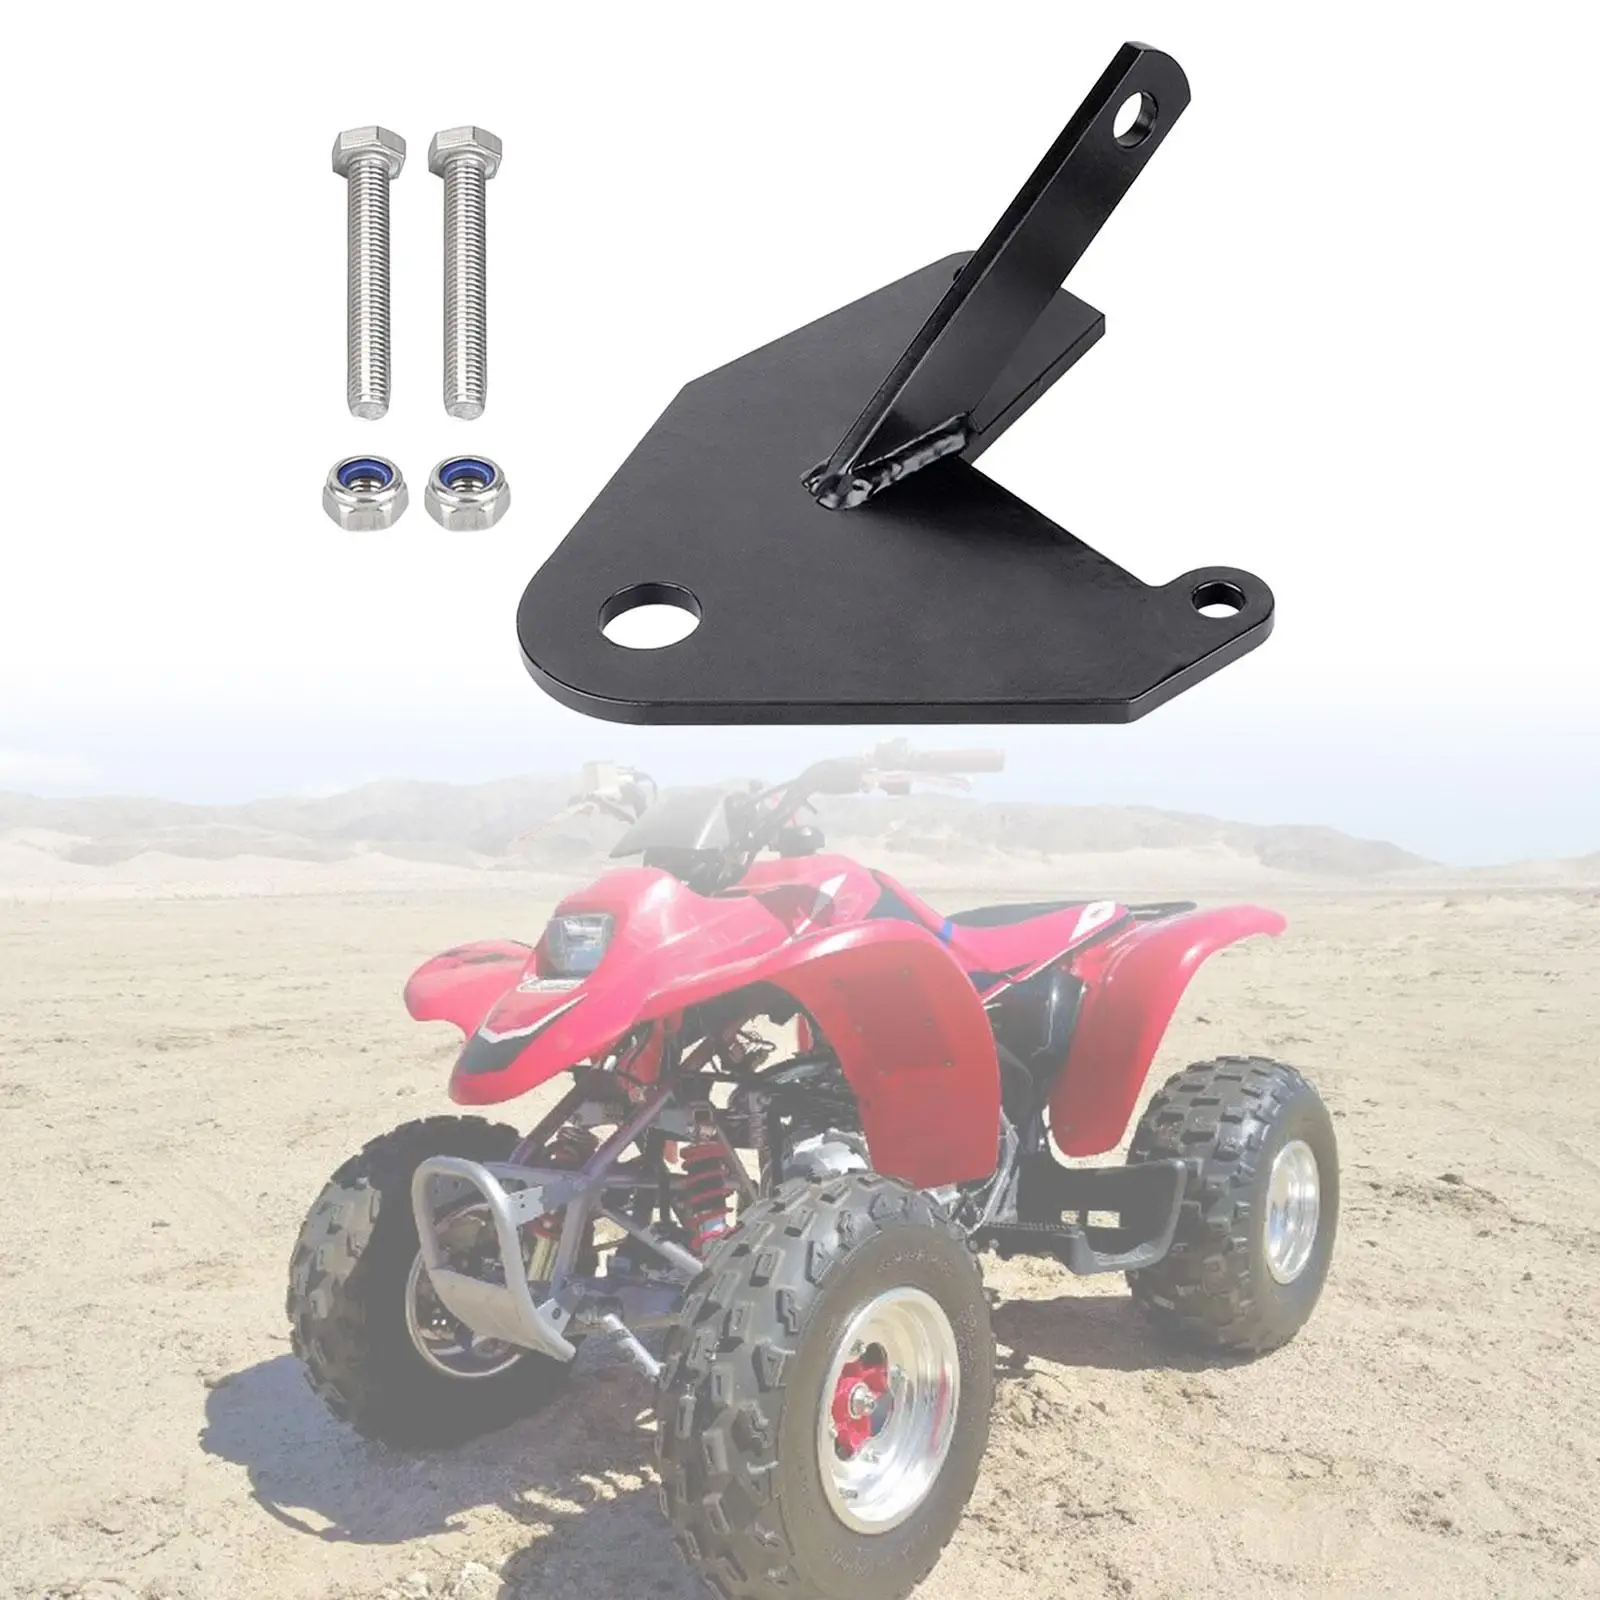 Trailer Hitch Receiver Ball Mount, ATV Ball Hitch with Hardware, Professional,